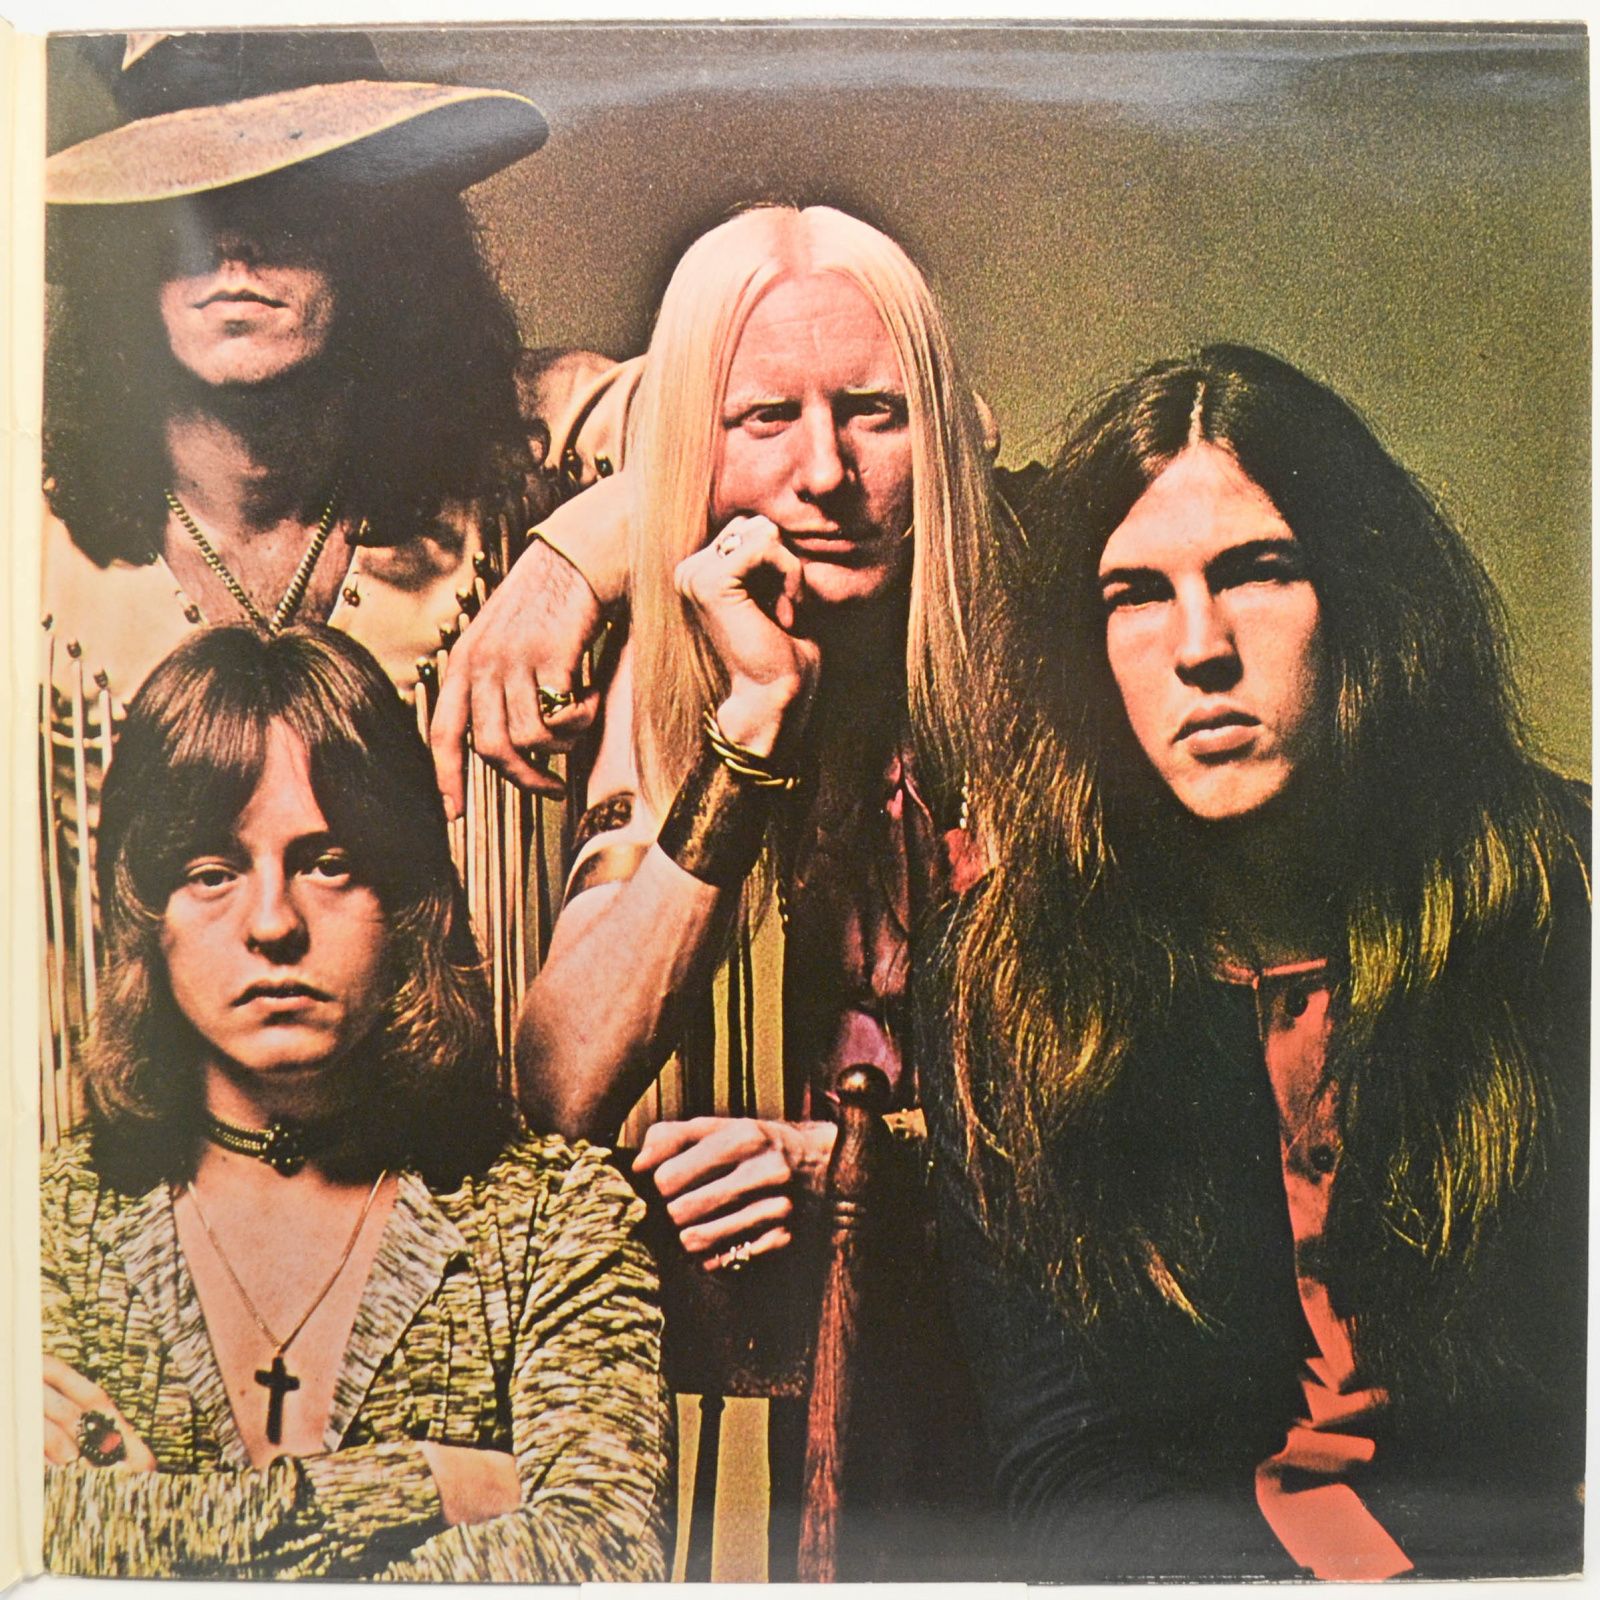 Johnny Winter And — Live Johnny Winter And, 1971